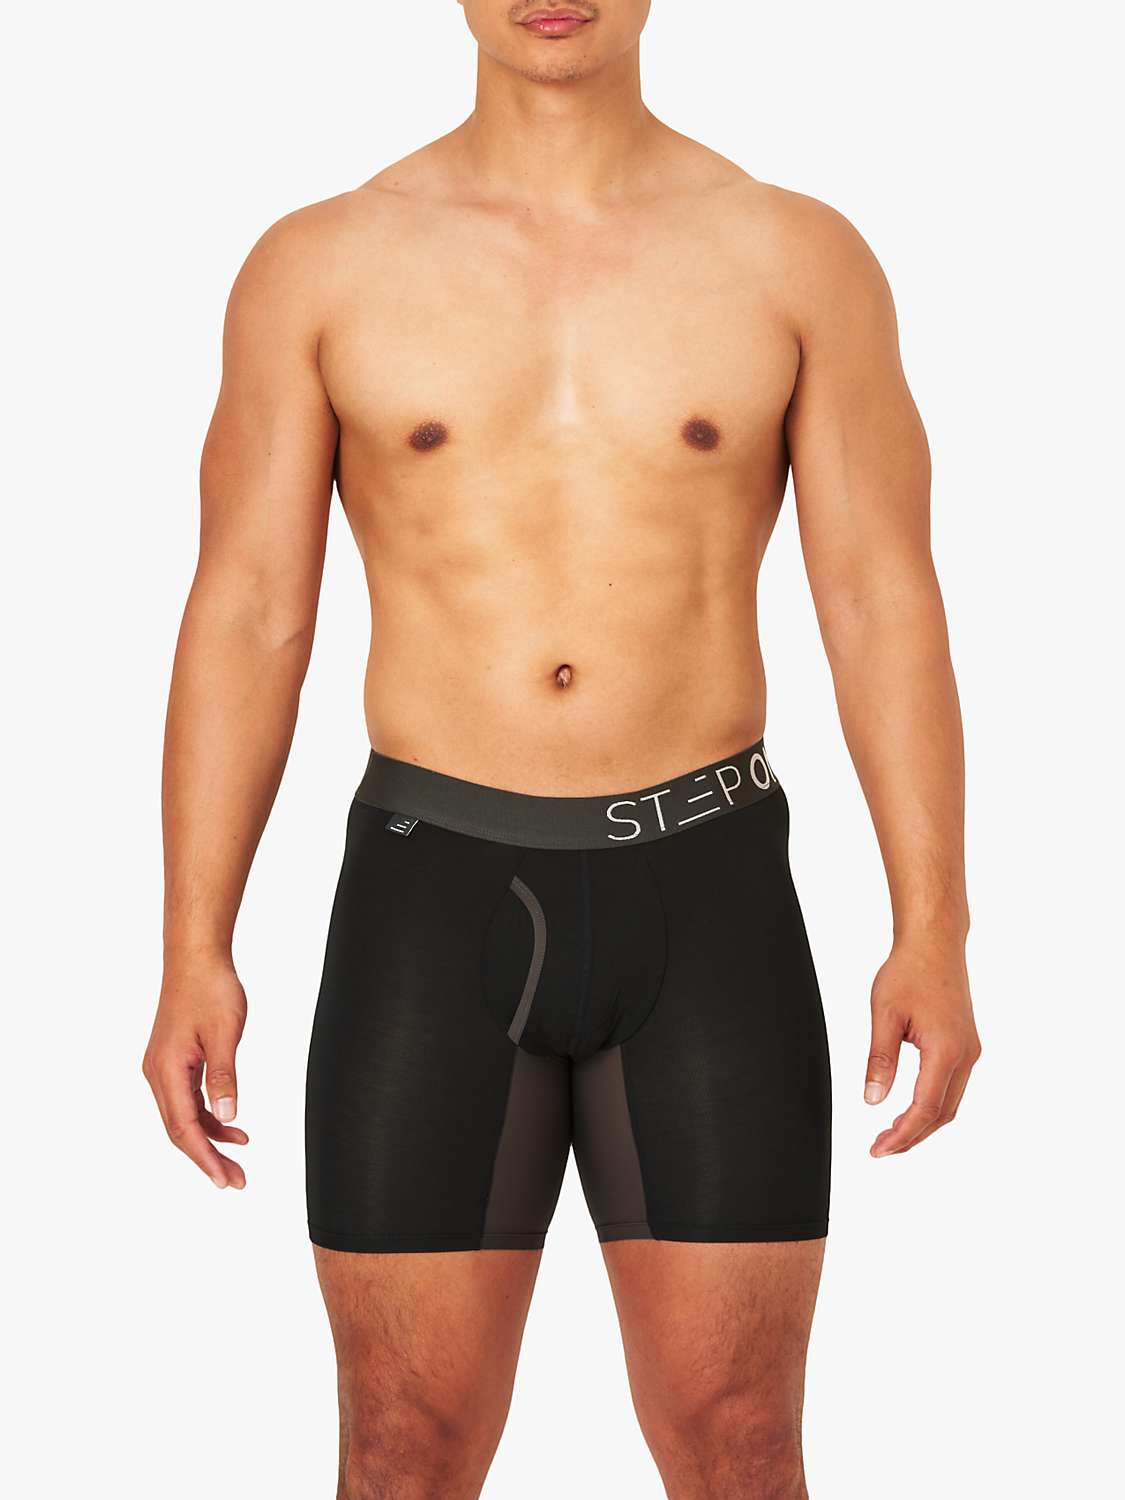 Buy Step One Bamboo Boxer Briefs With Fly, Pack of 5 Online at johnlewis.com